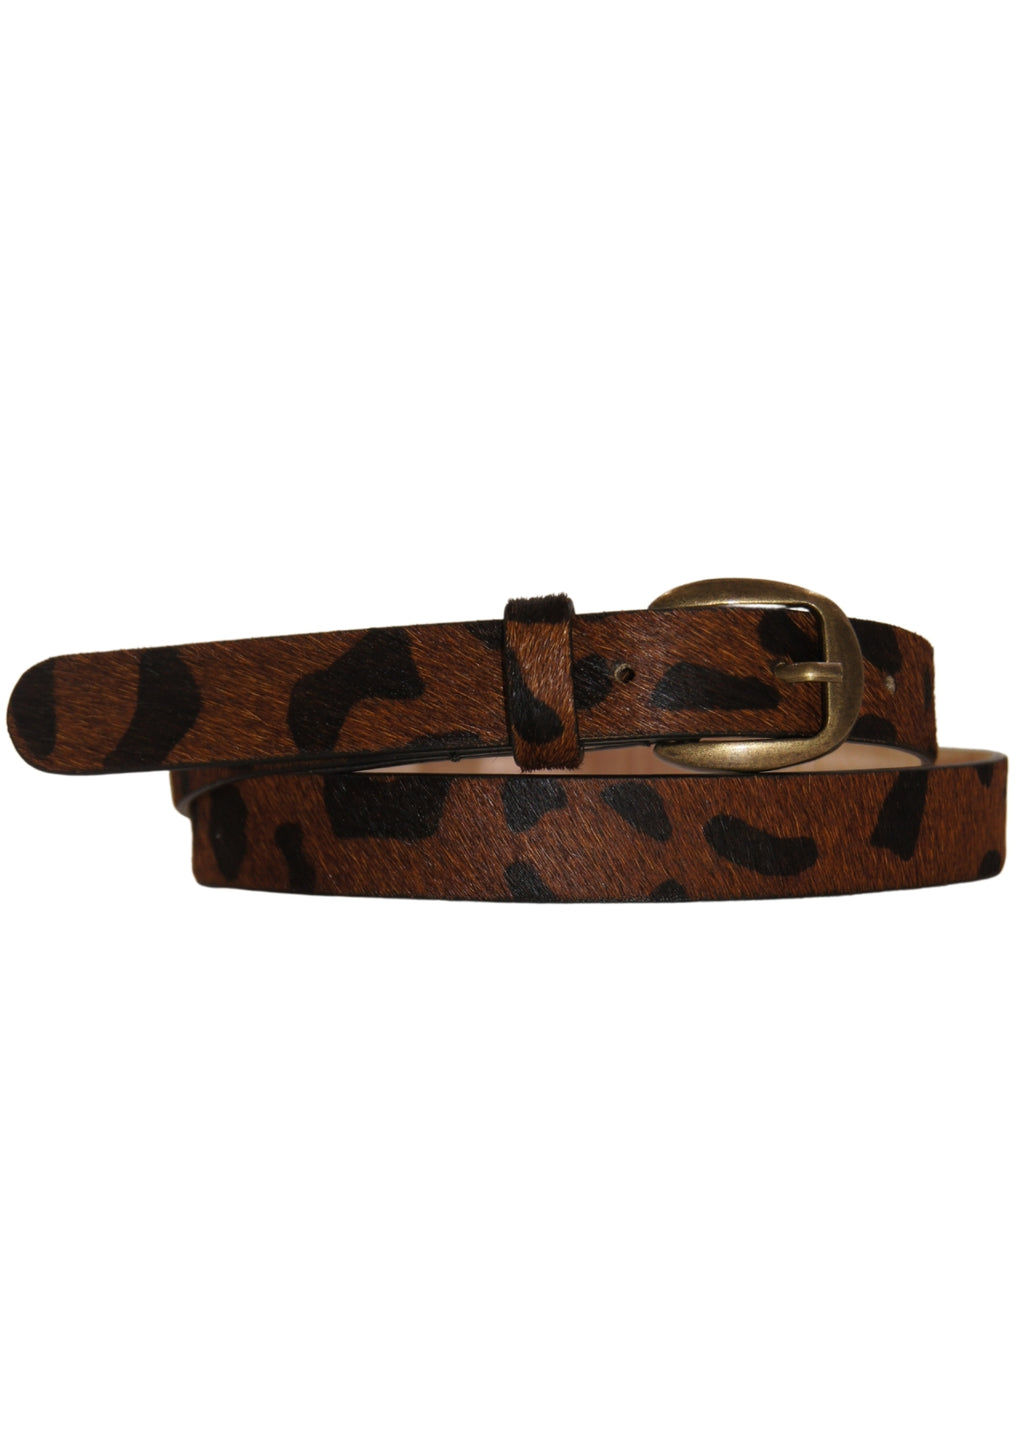 Leopard Skin Hair On Belt With Small Nickle Buckle ( SE-2187_Brown)